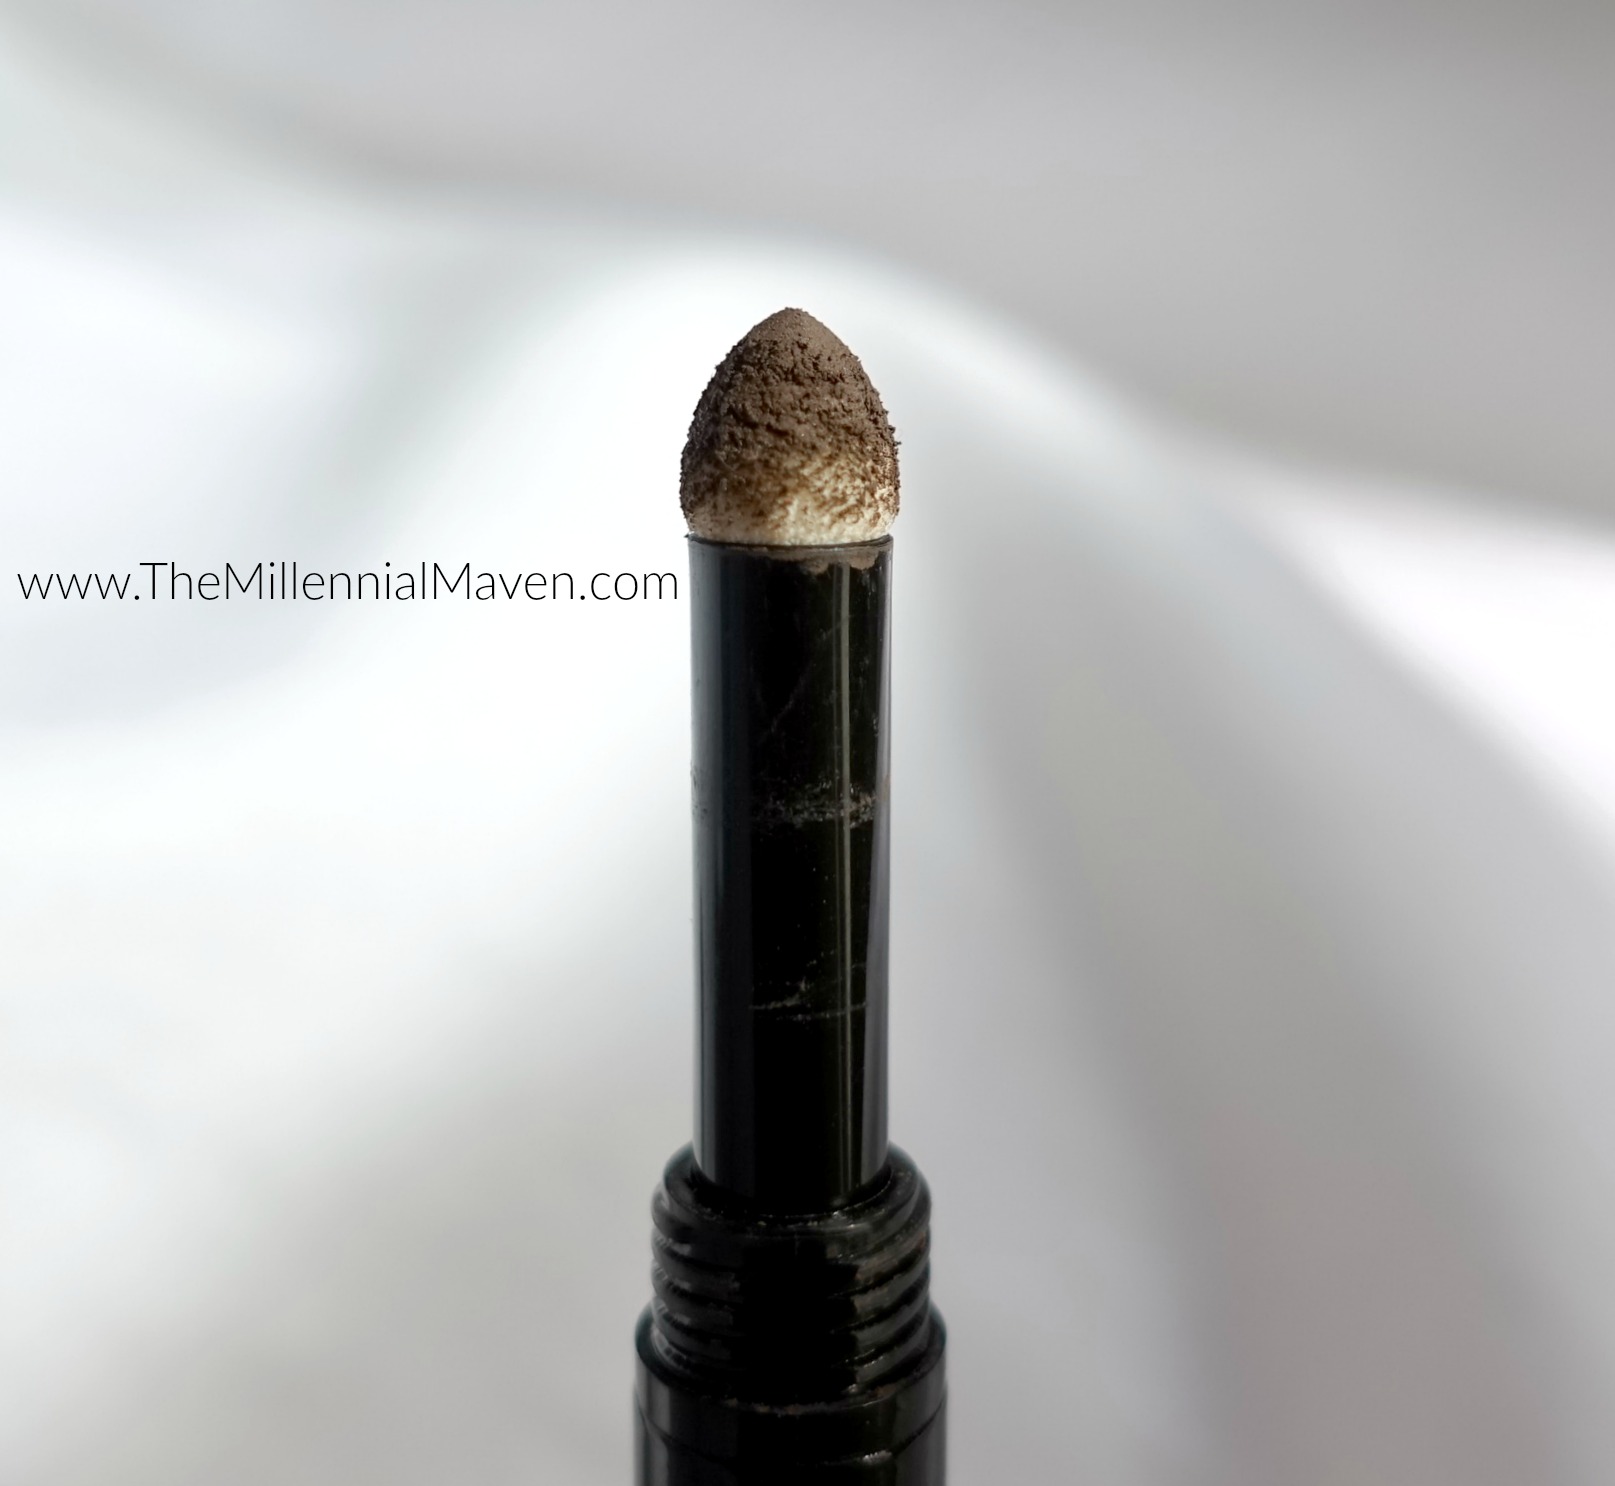 Maybelline Brow Define + Fill Duo, Soft Brown, Deep Brown